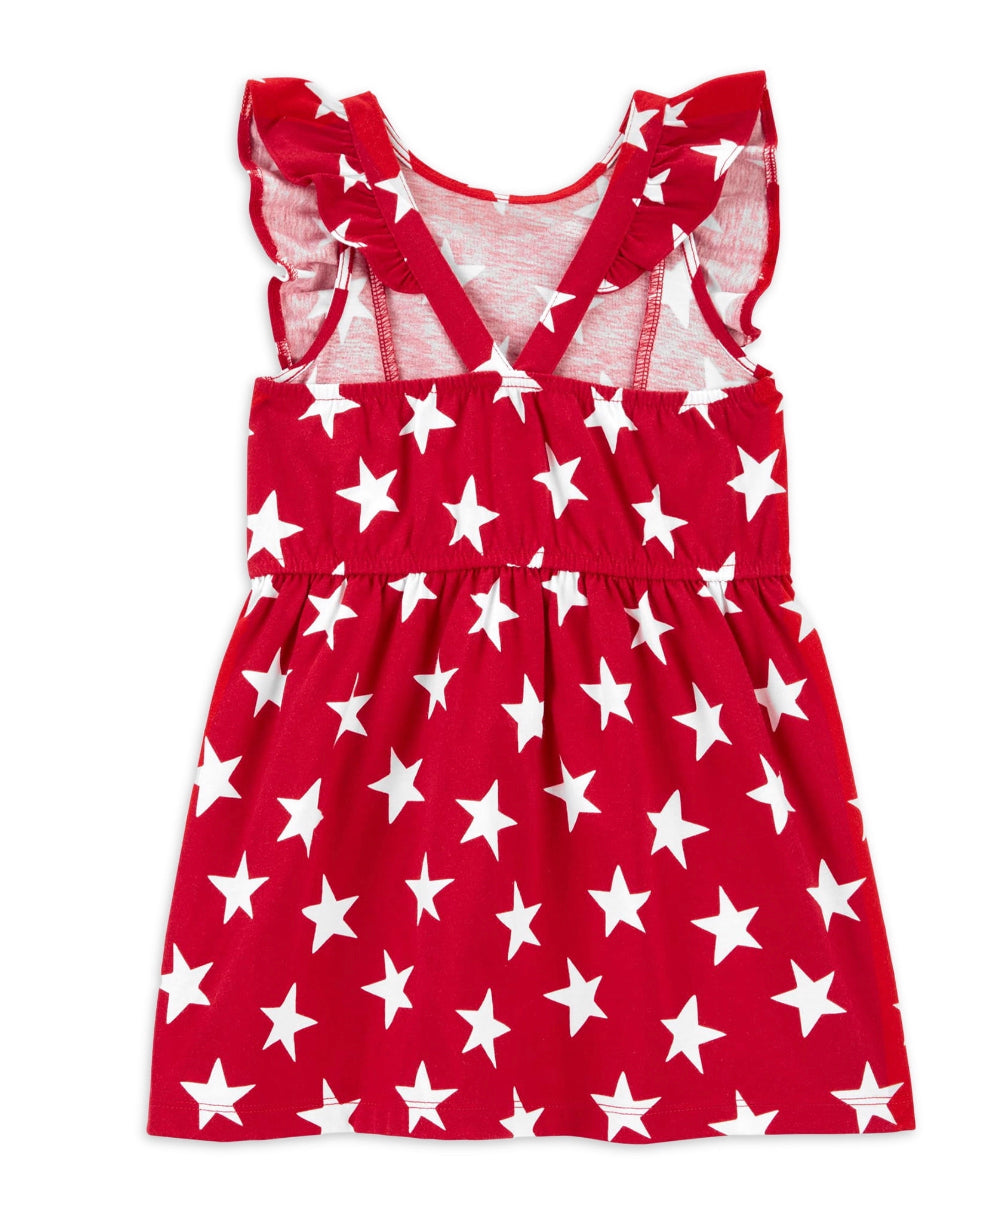 4th of july dress - embroidered custom name